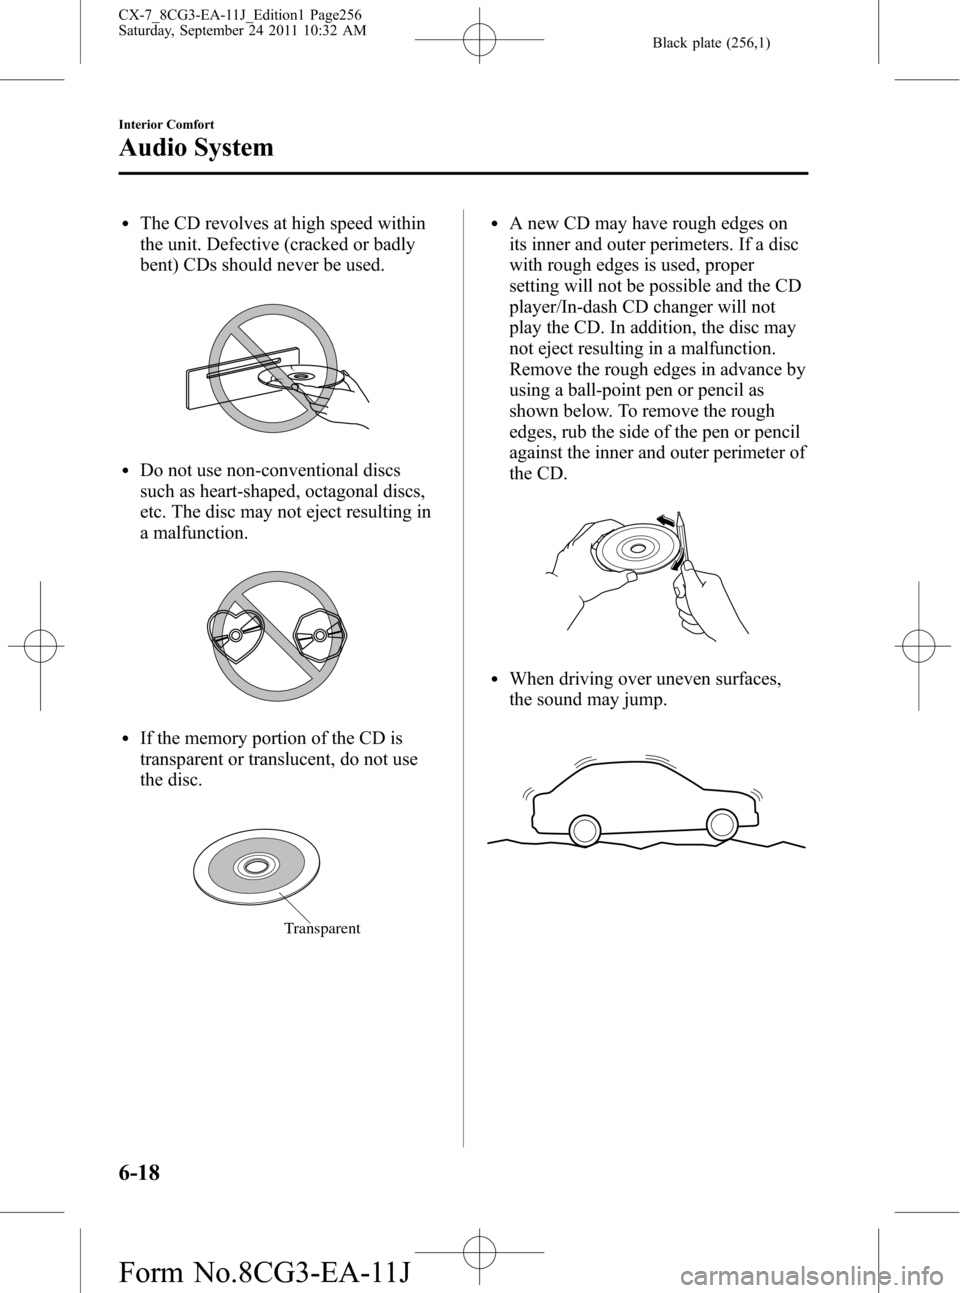 MAZDA MODEL CX-7 2012  Owners Manual (in English) Black plate (256,1)
lThe CD revolves at high speed within
the unit. Defective (cracked or badly
bent) CDs should never be used.
lDo not use non-conventional discs
such as heart-shaped, octagonal discs